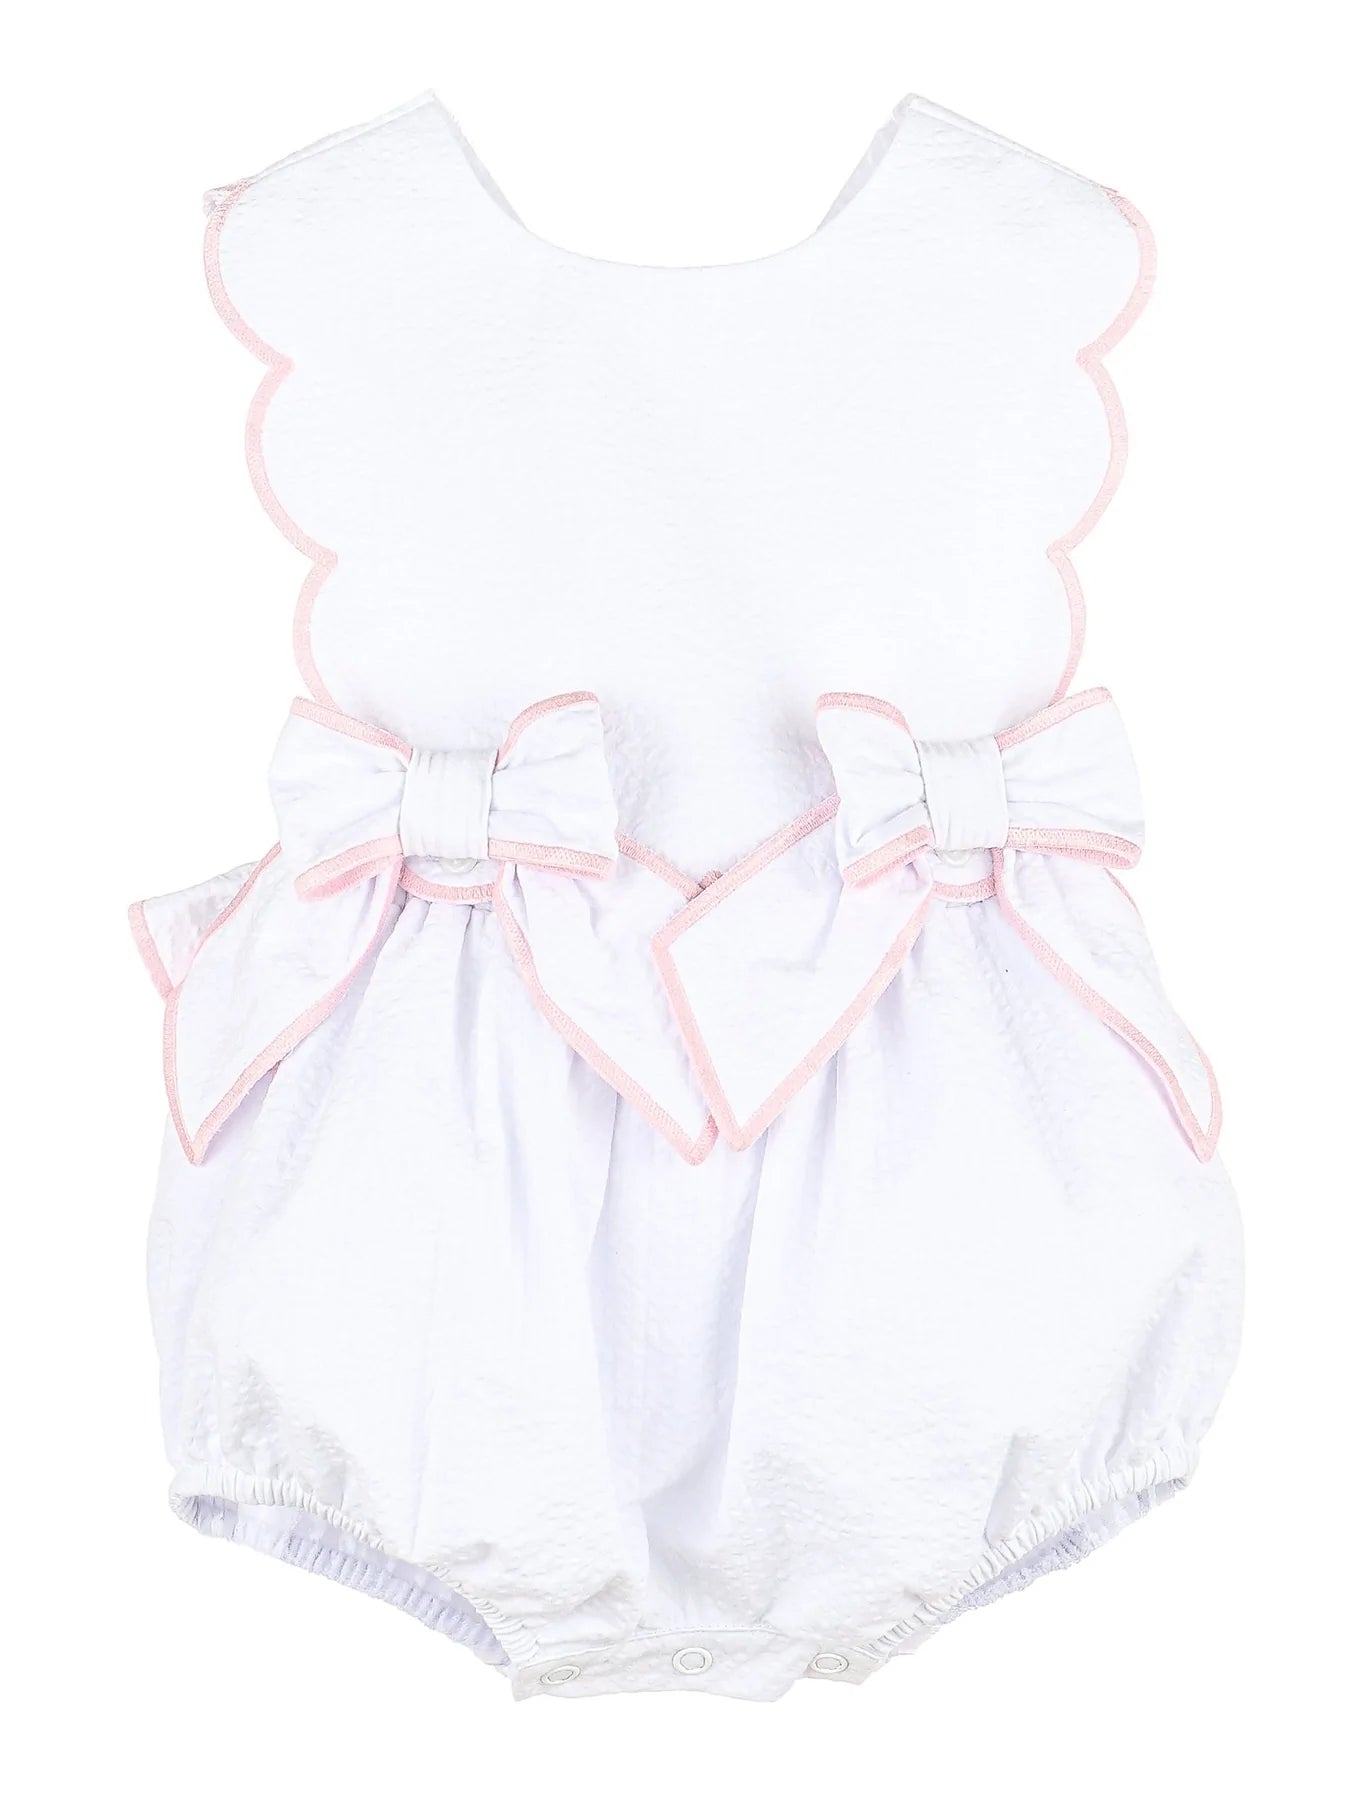 Sip & See Girl Overall - White - Breckenridge Baby